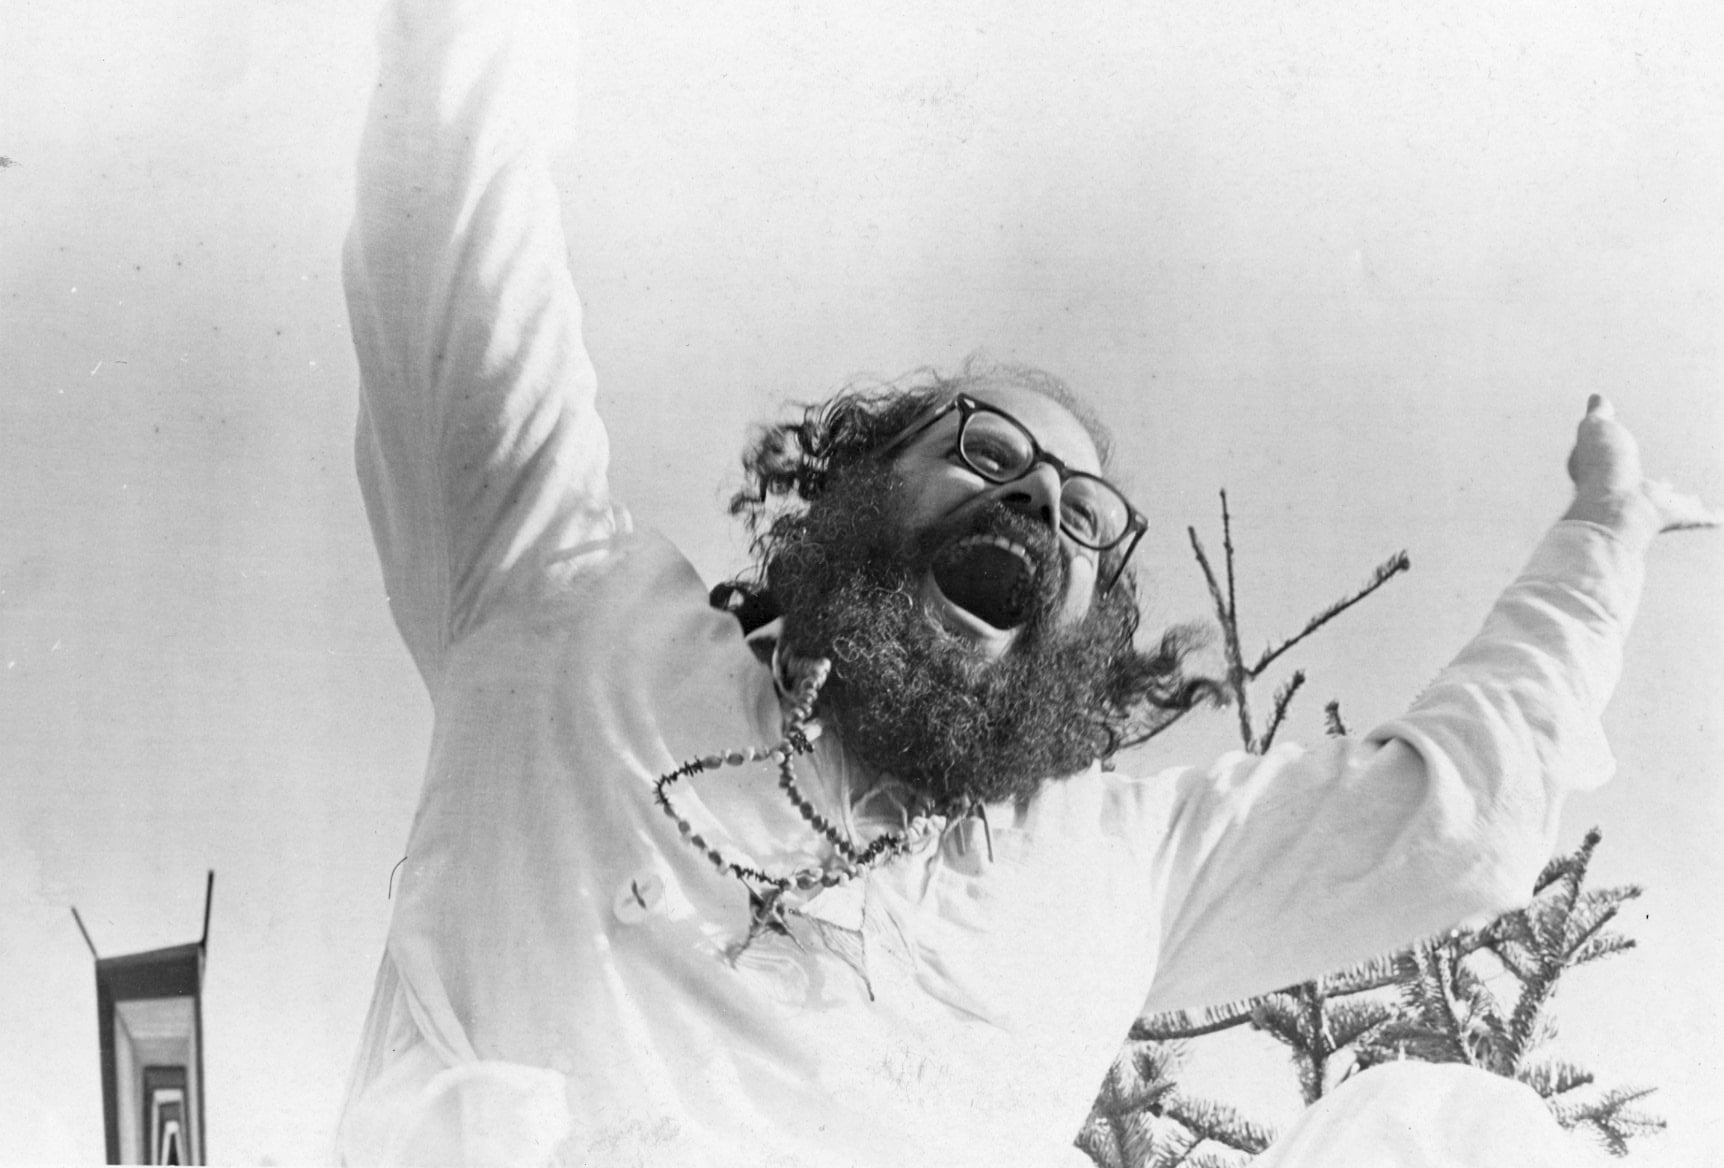 Allen Ginsberg howling by Beth Bagey